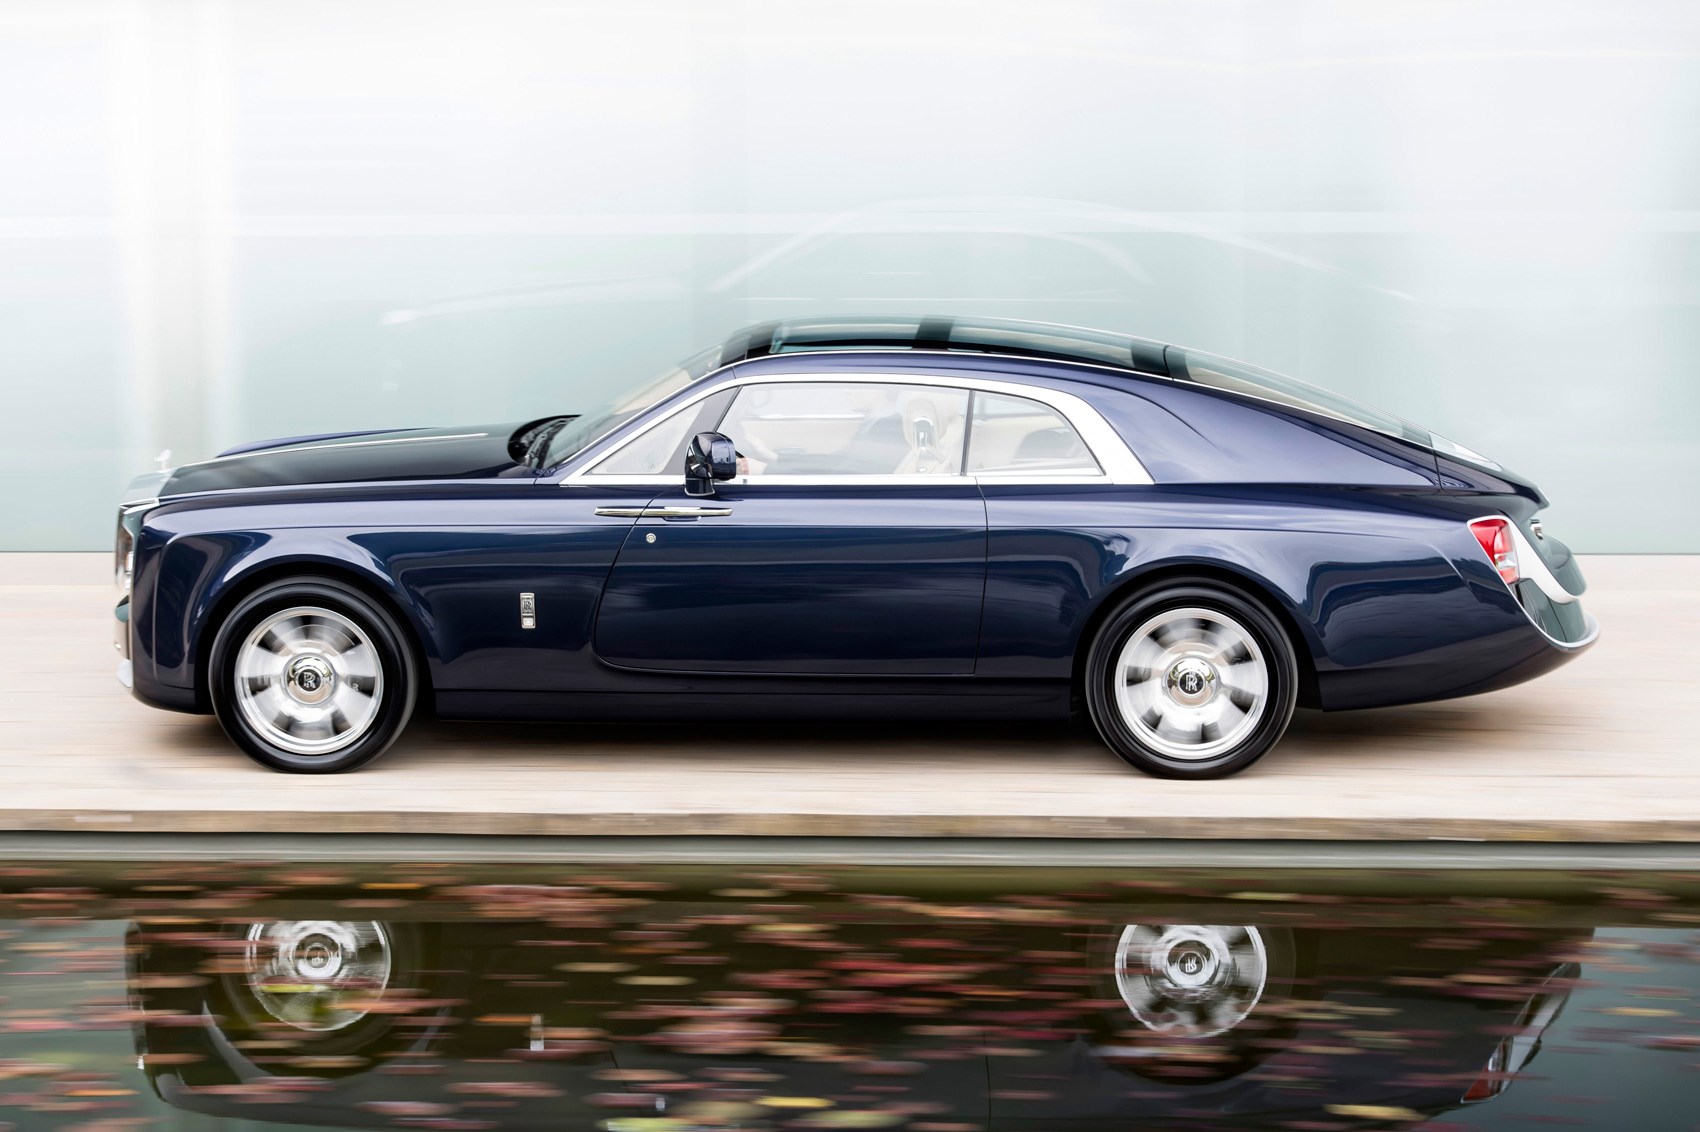 Seven Wild And Truly Bespoke Details Of The Rolls-Royce Boat Tail